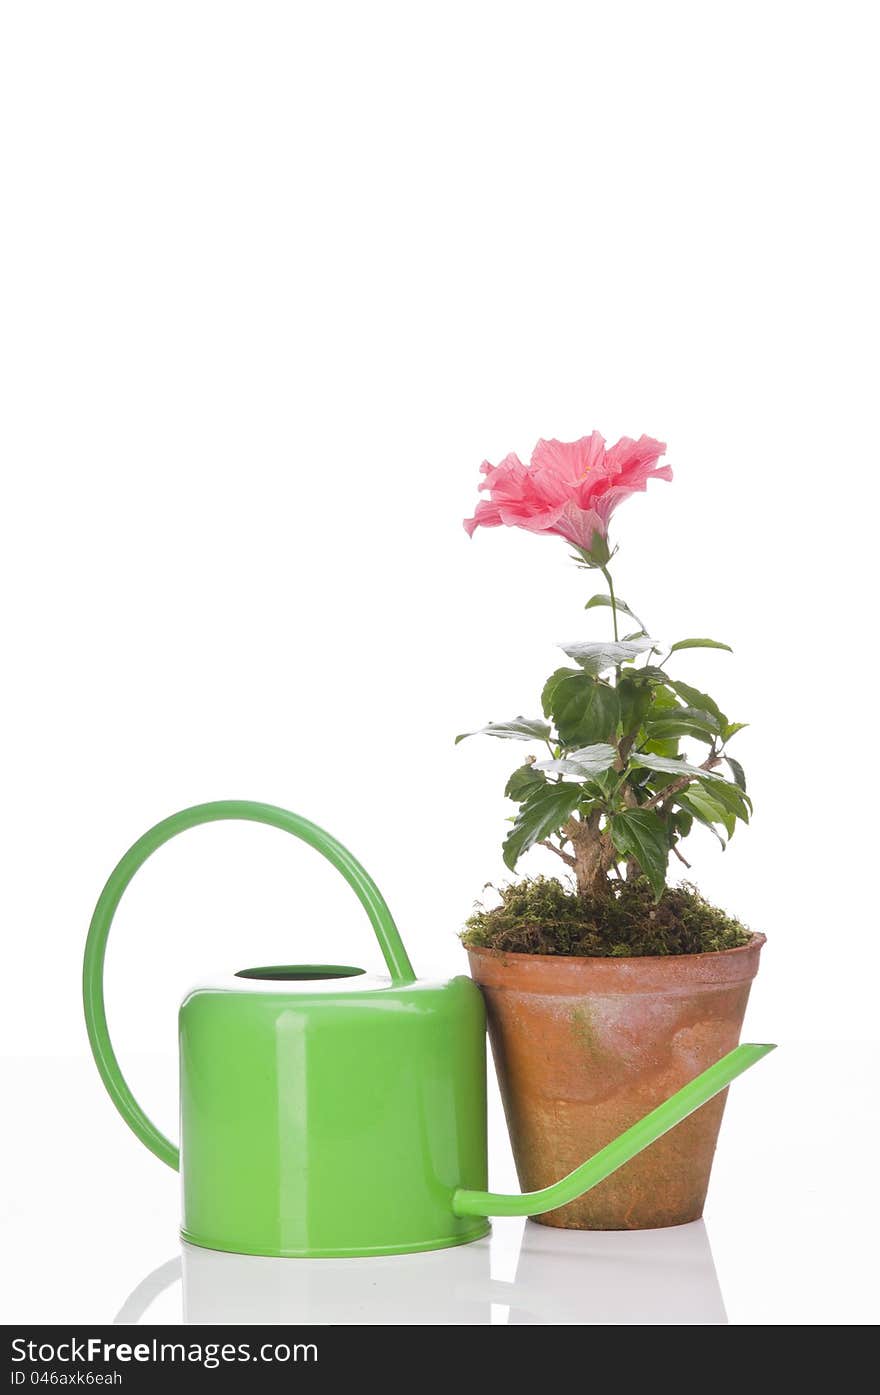 Hibiskus flower in a pot with watering can isolated over white background. Hibiskus flower in a pot with watering can isolated over white background